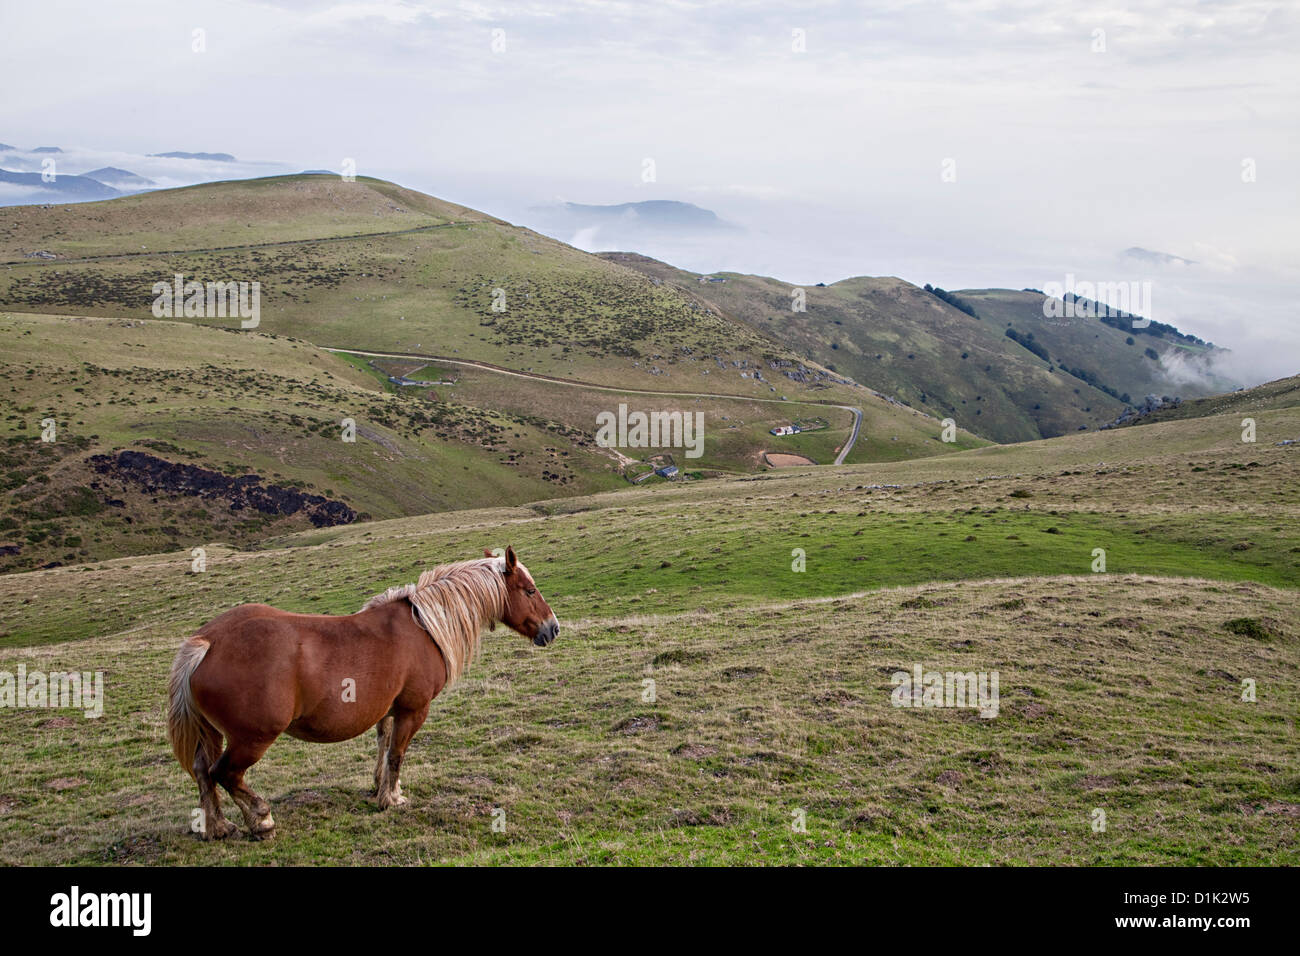 brown horse (pony) standing, looking at the foggy valleys, part of the landscape of the Pyrenees Mountains. Stock Photo